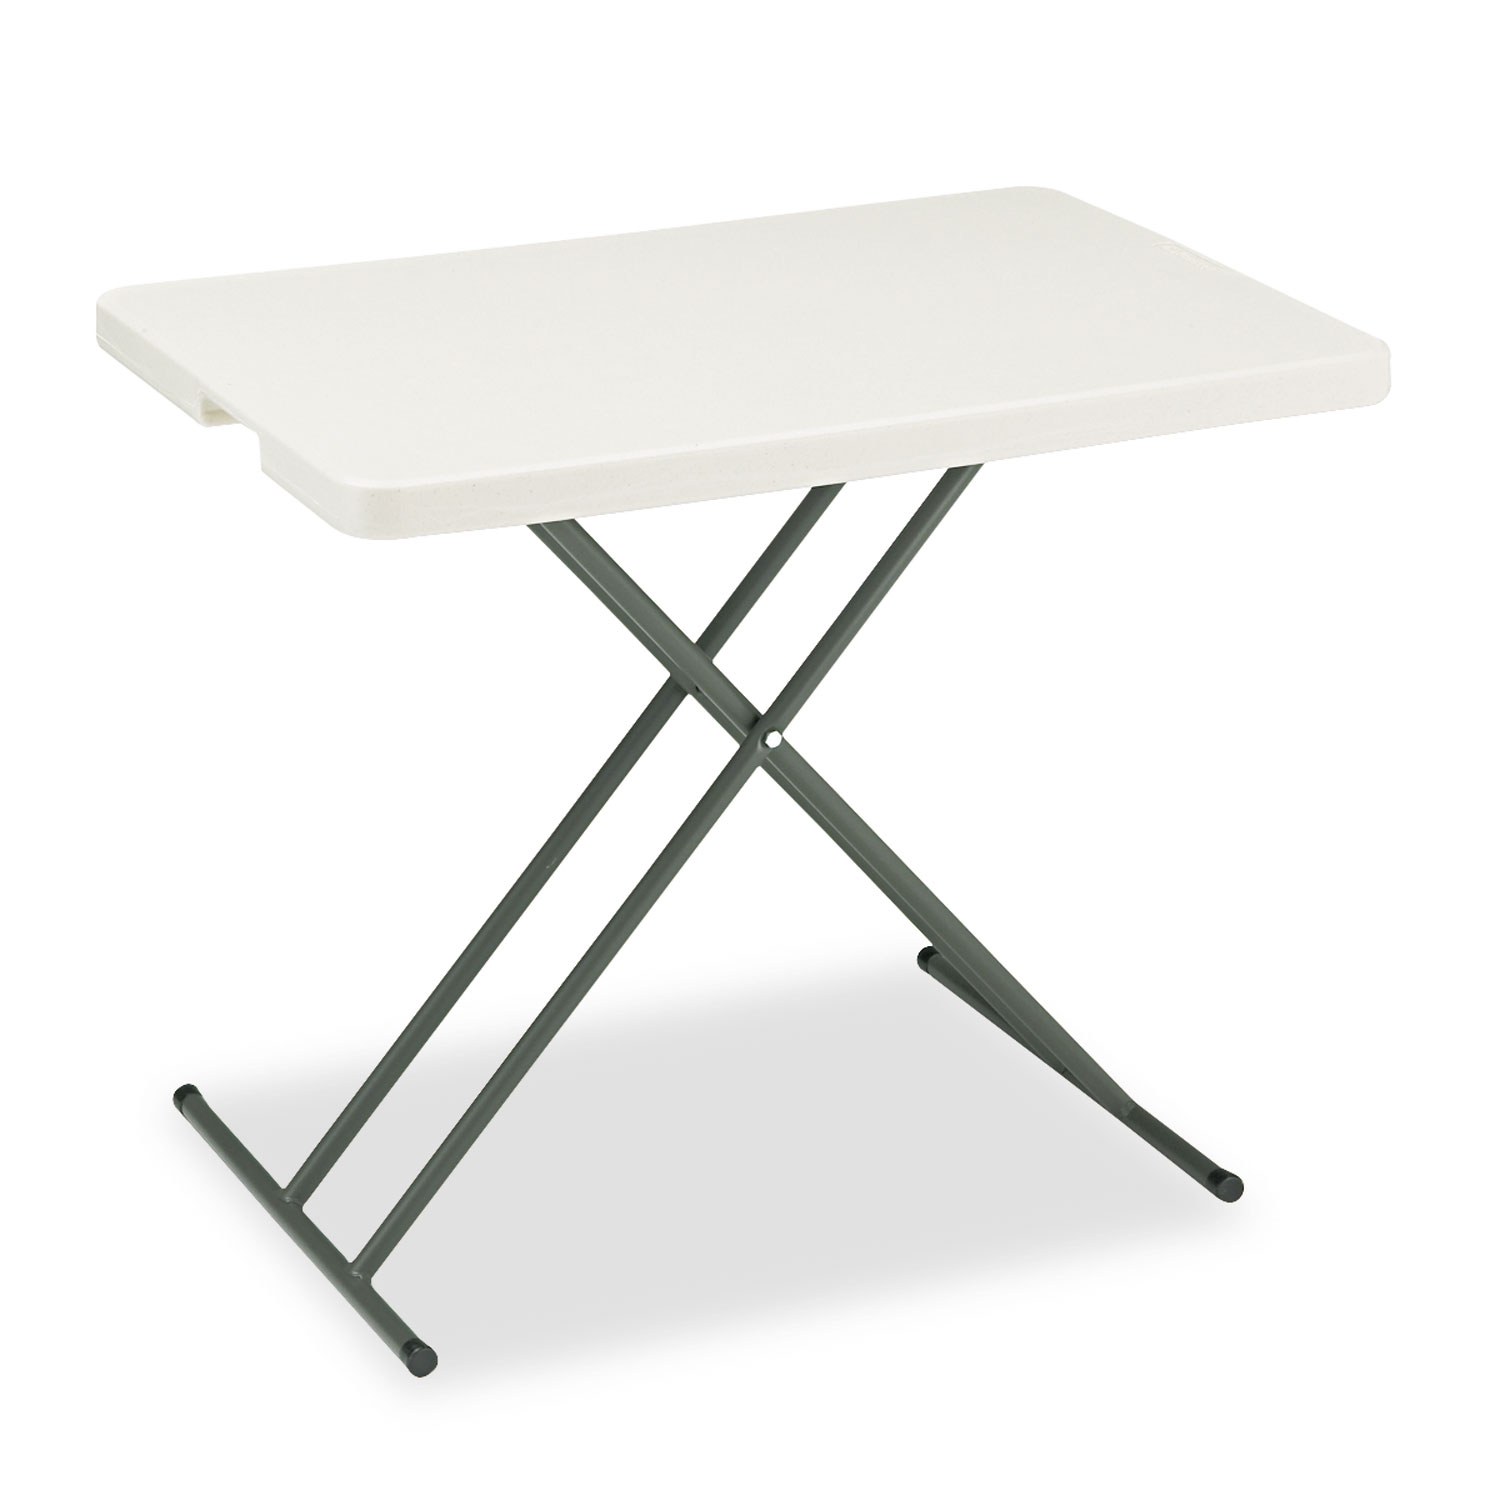  Iceberg 65490 IndestrucTables Too 1200 Series Resin Personal Folding Table, 30 x 20, Platinum (ICE65490) 